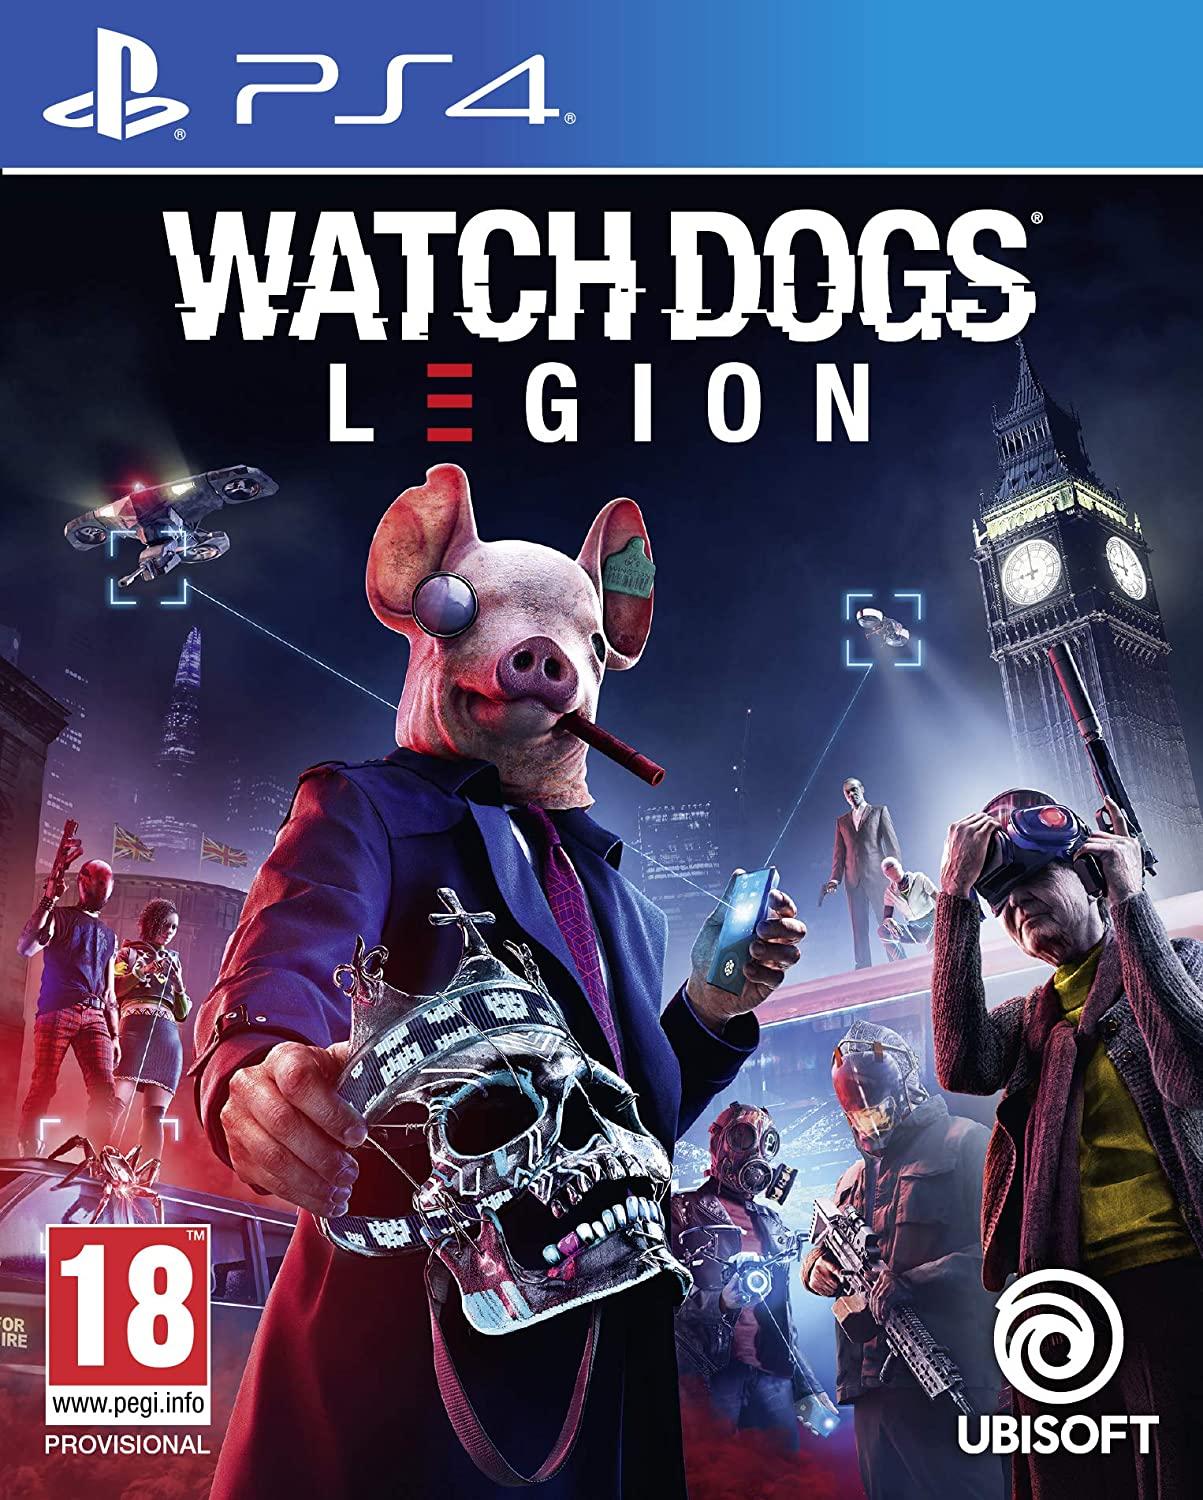 The box art for Watch Dogs Legion